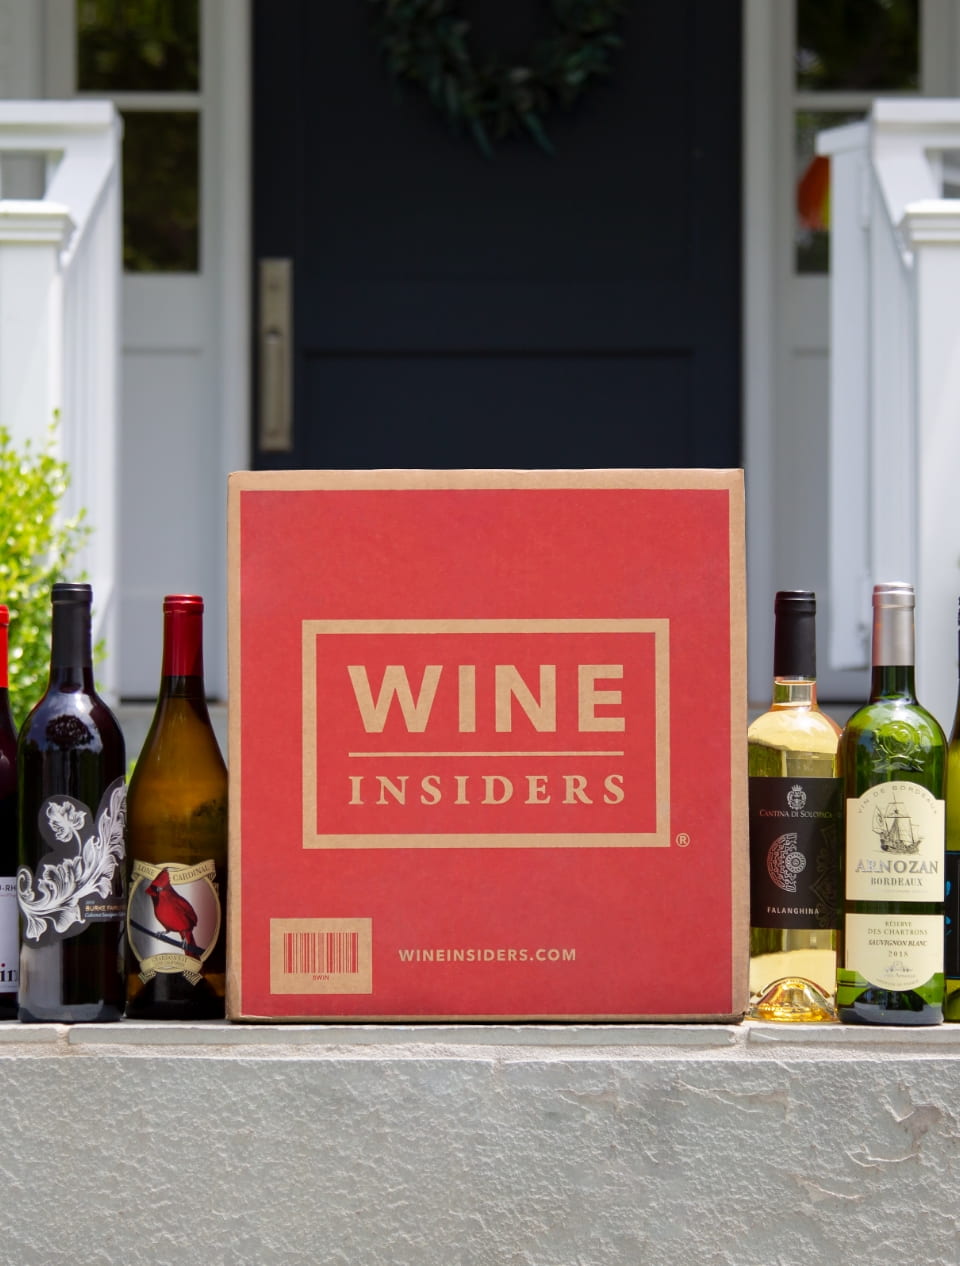 Wine Insiders Club: Get 15 Expert-Curated Bottles of Wine Every Month for Only $89 + FREE Shipping!